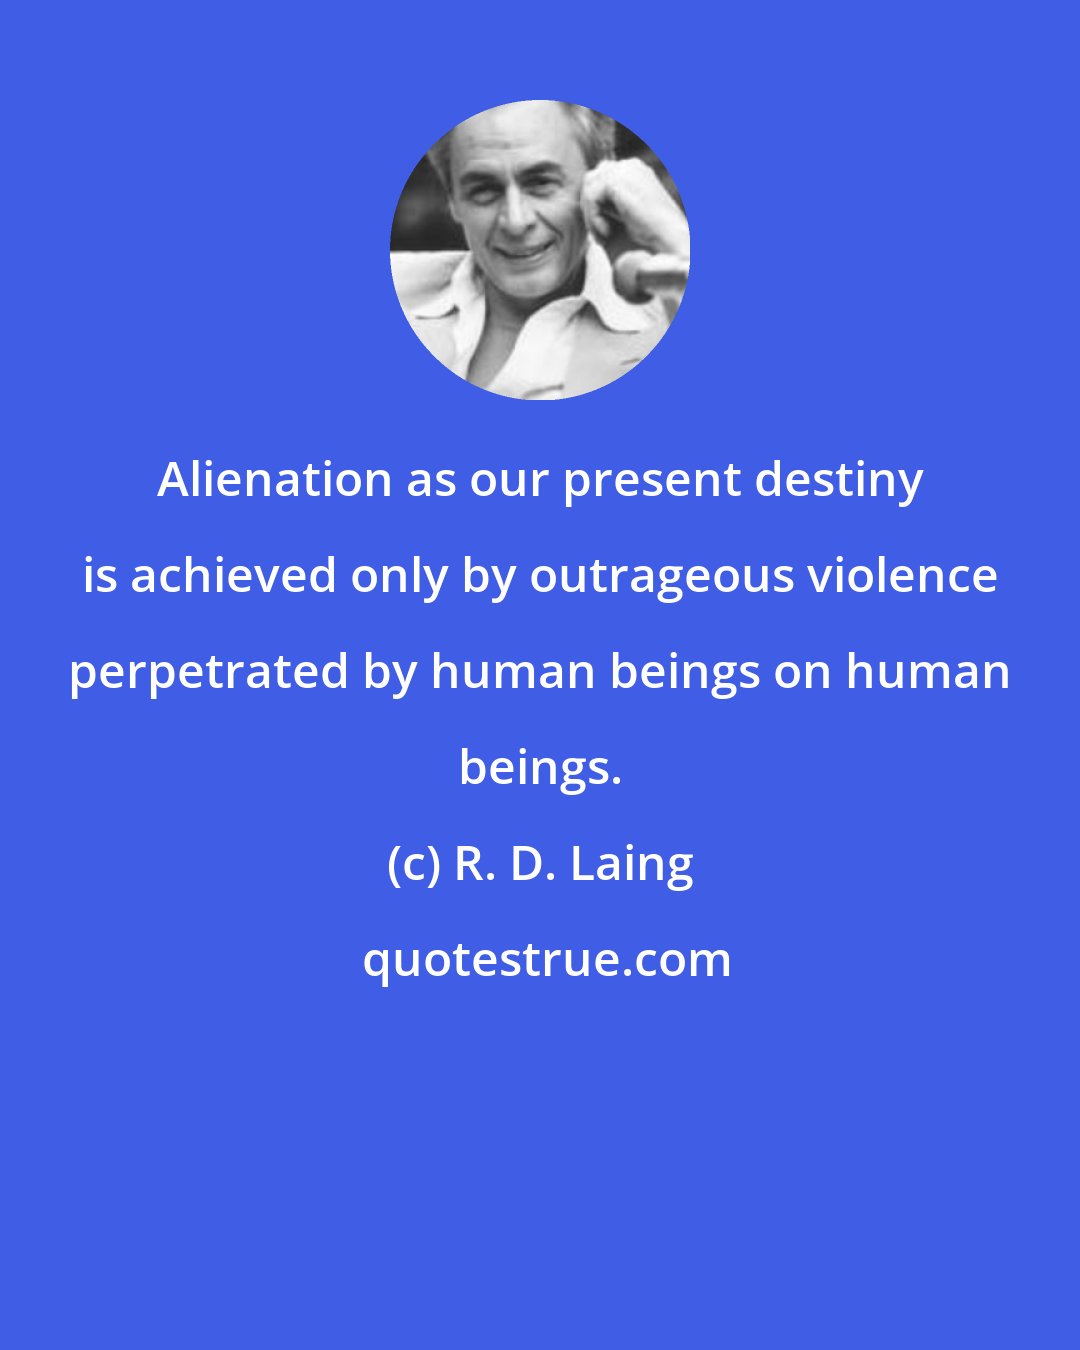 R. D. Laing: Alienation as our present destiny is achieved only by outrageous violence perpetrated by human beings on human beings.